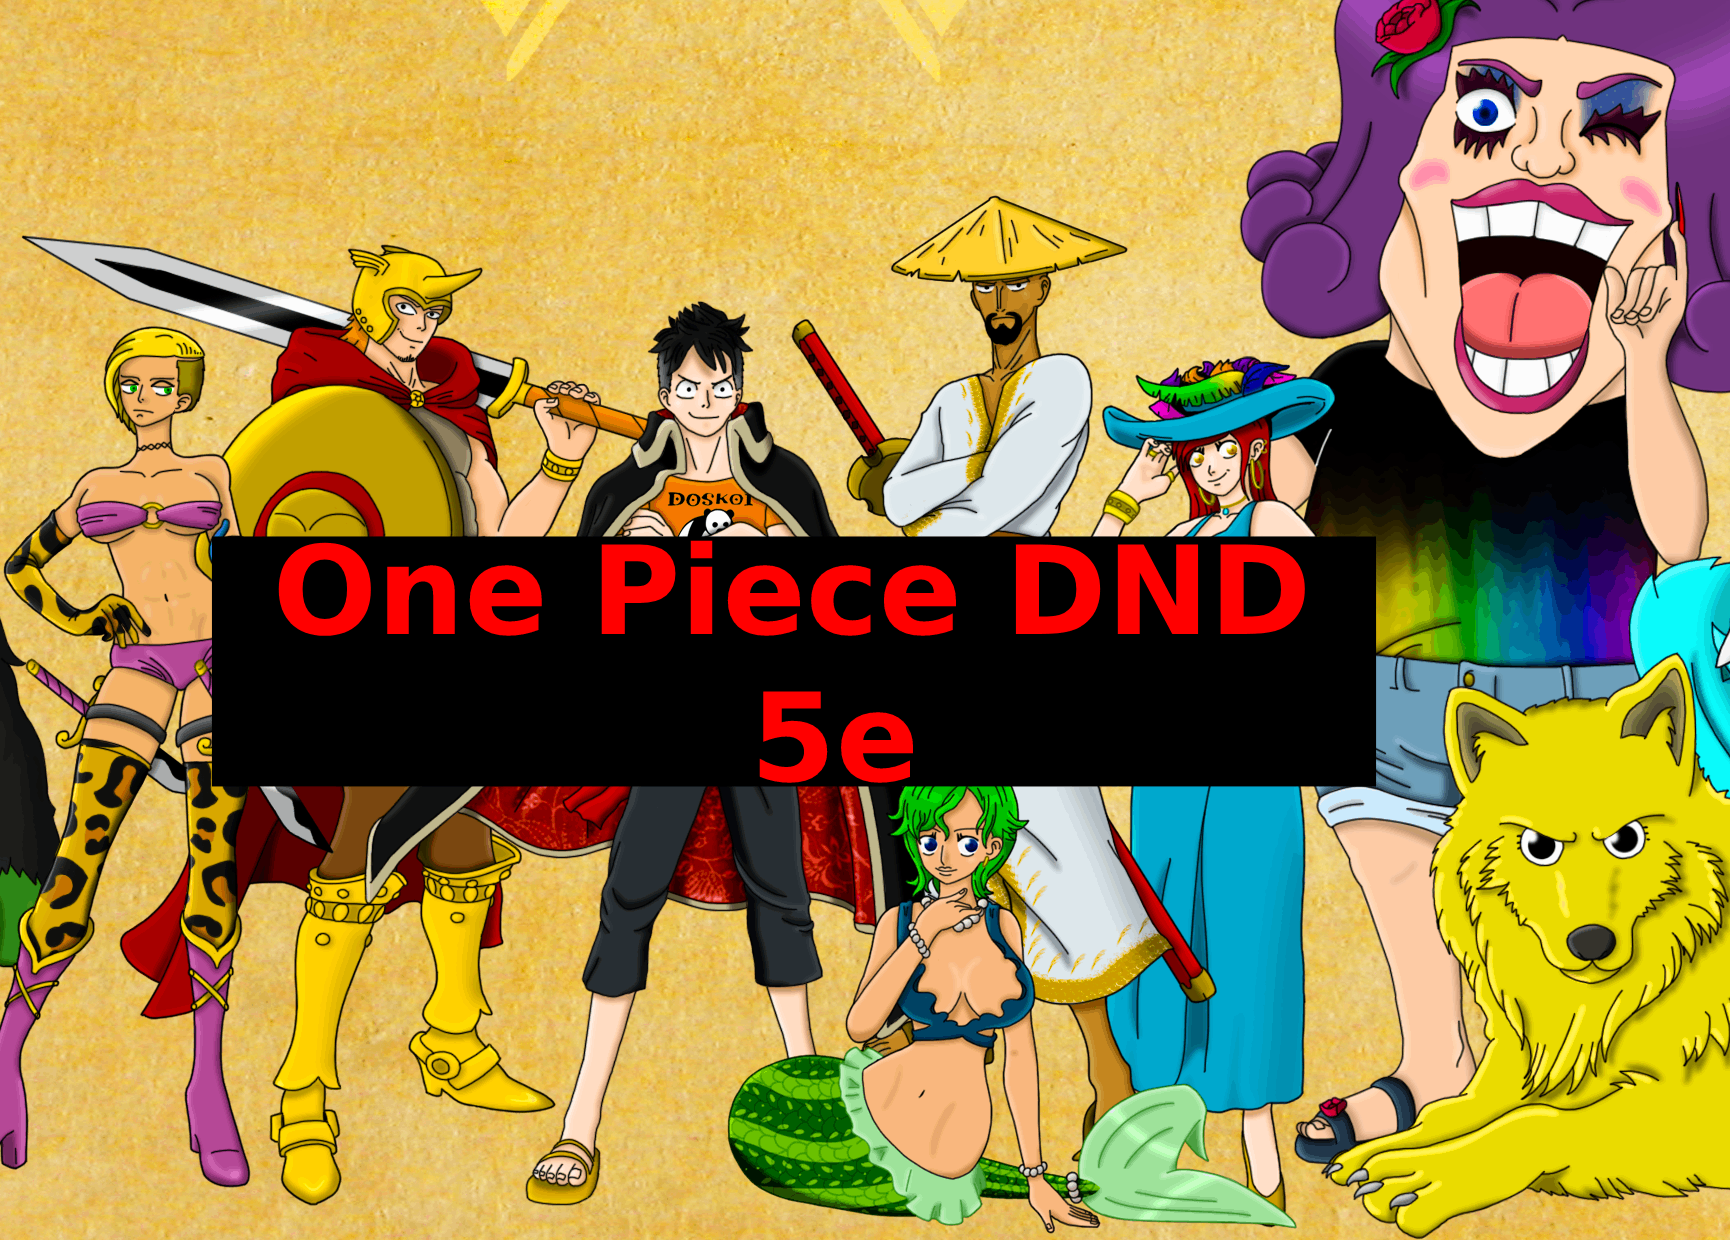 🏴‍☠️One Piece Dnd 5e 🌴 Exploring the East Blue 🐳 Play Dungeons & Dragons 5e on Discord and Roll 20 🐠